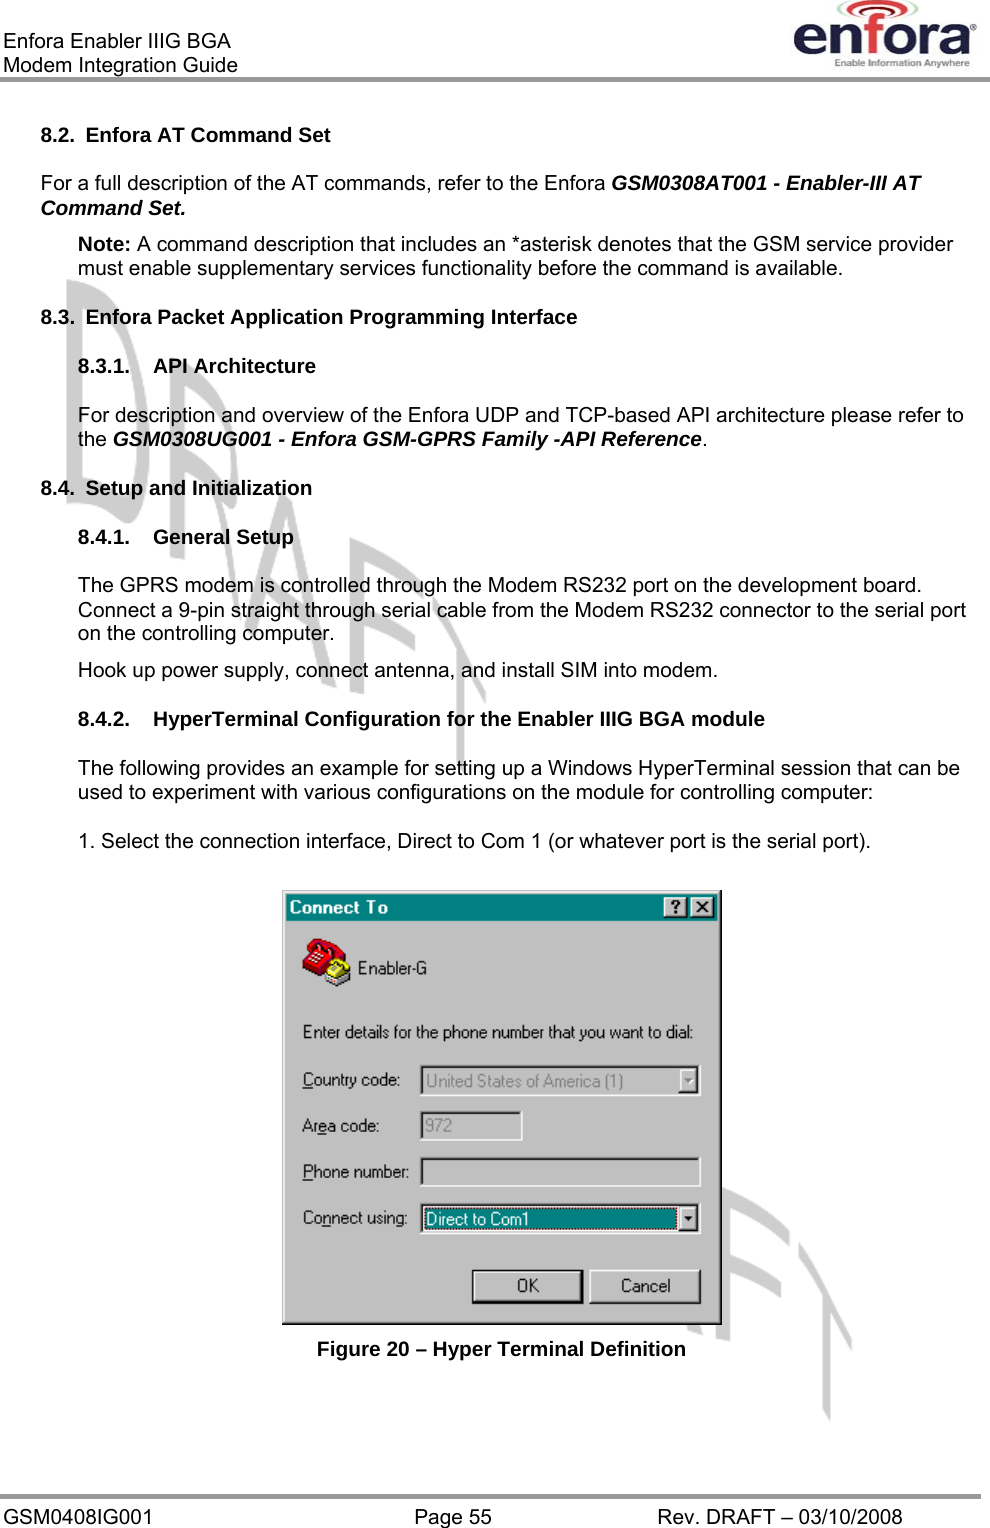 Enfora Enabler IIIG BGA Modem Integration Guide 8.2.  Enfora AT Command Set For a full description of the AT commands, refer to the Enfora GSM0308AT001 - Enabler-III AT Command Set. Note: A command description that includes an *asterisk denotes that the GSM service provider must enable supplementary services functionality before the command is available. 8.3.  Enfora Packet Application Programming Interface 8.3.1. API Architecture For description and overview of the Enfora UDP and TCP-based API architecture please refer to the GSM0308UG001 - Enfora GSM-GPRS Family -API Reference.   8.4.  Setup and Initialization 8.4.1. General Setup The GPRS modem is controlled through the Modem RS232 port on the development board.  Connect a 9-pin straight through serial cable from the Modem RS232 connector to the serial port on the controlling computer. Hook up power supply, connect antenna, and install SIM into modem. 8.4.2. HyperTerminal Configuration for the Enabler IIIG BGA module The following provides an example for setting up a Windows HyperTerminal session that can be used to experiment with various configurations on the module for controlling computer: 1. Select the connection interface, Direct to Com 1 (or whatever port is the serial port).  Figure 20 – Hyper Terminal Definition GSM0408IG001  Page 55  Rev. DRAFT – 03/10/2008 